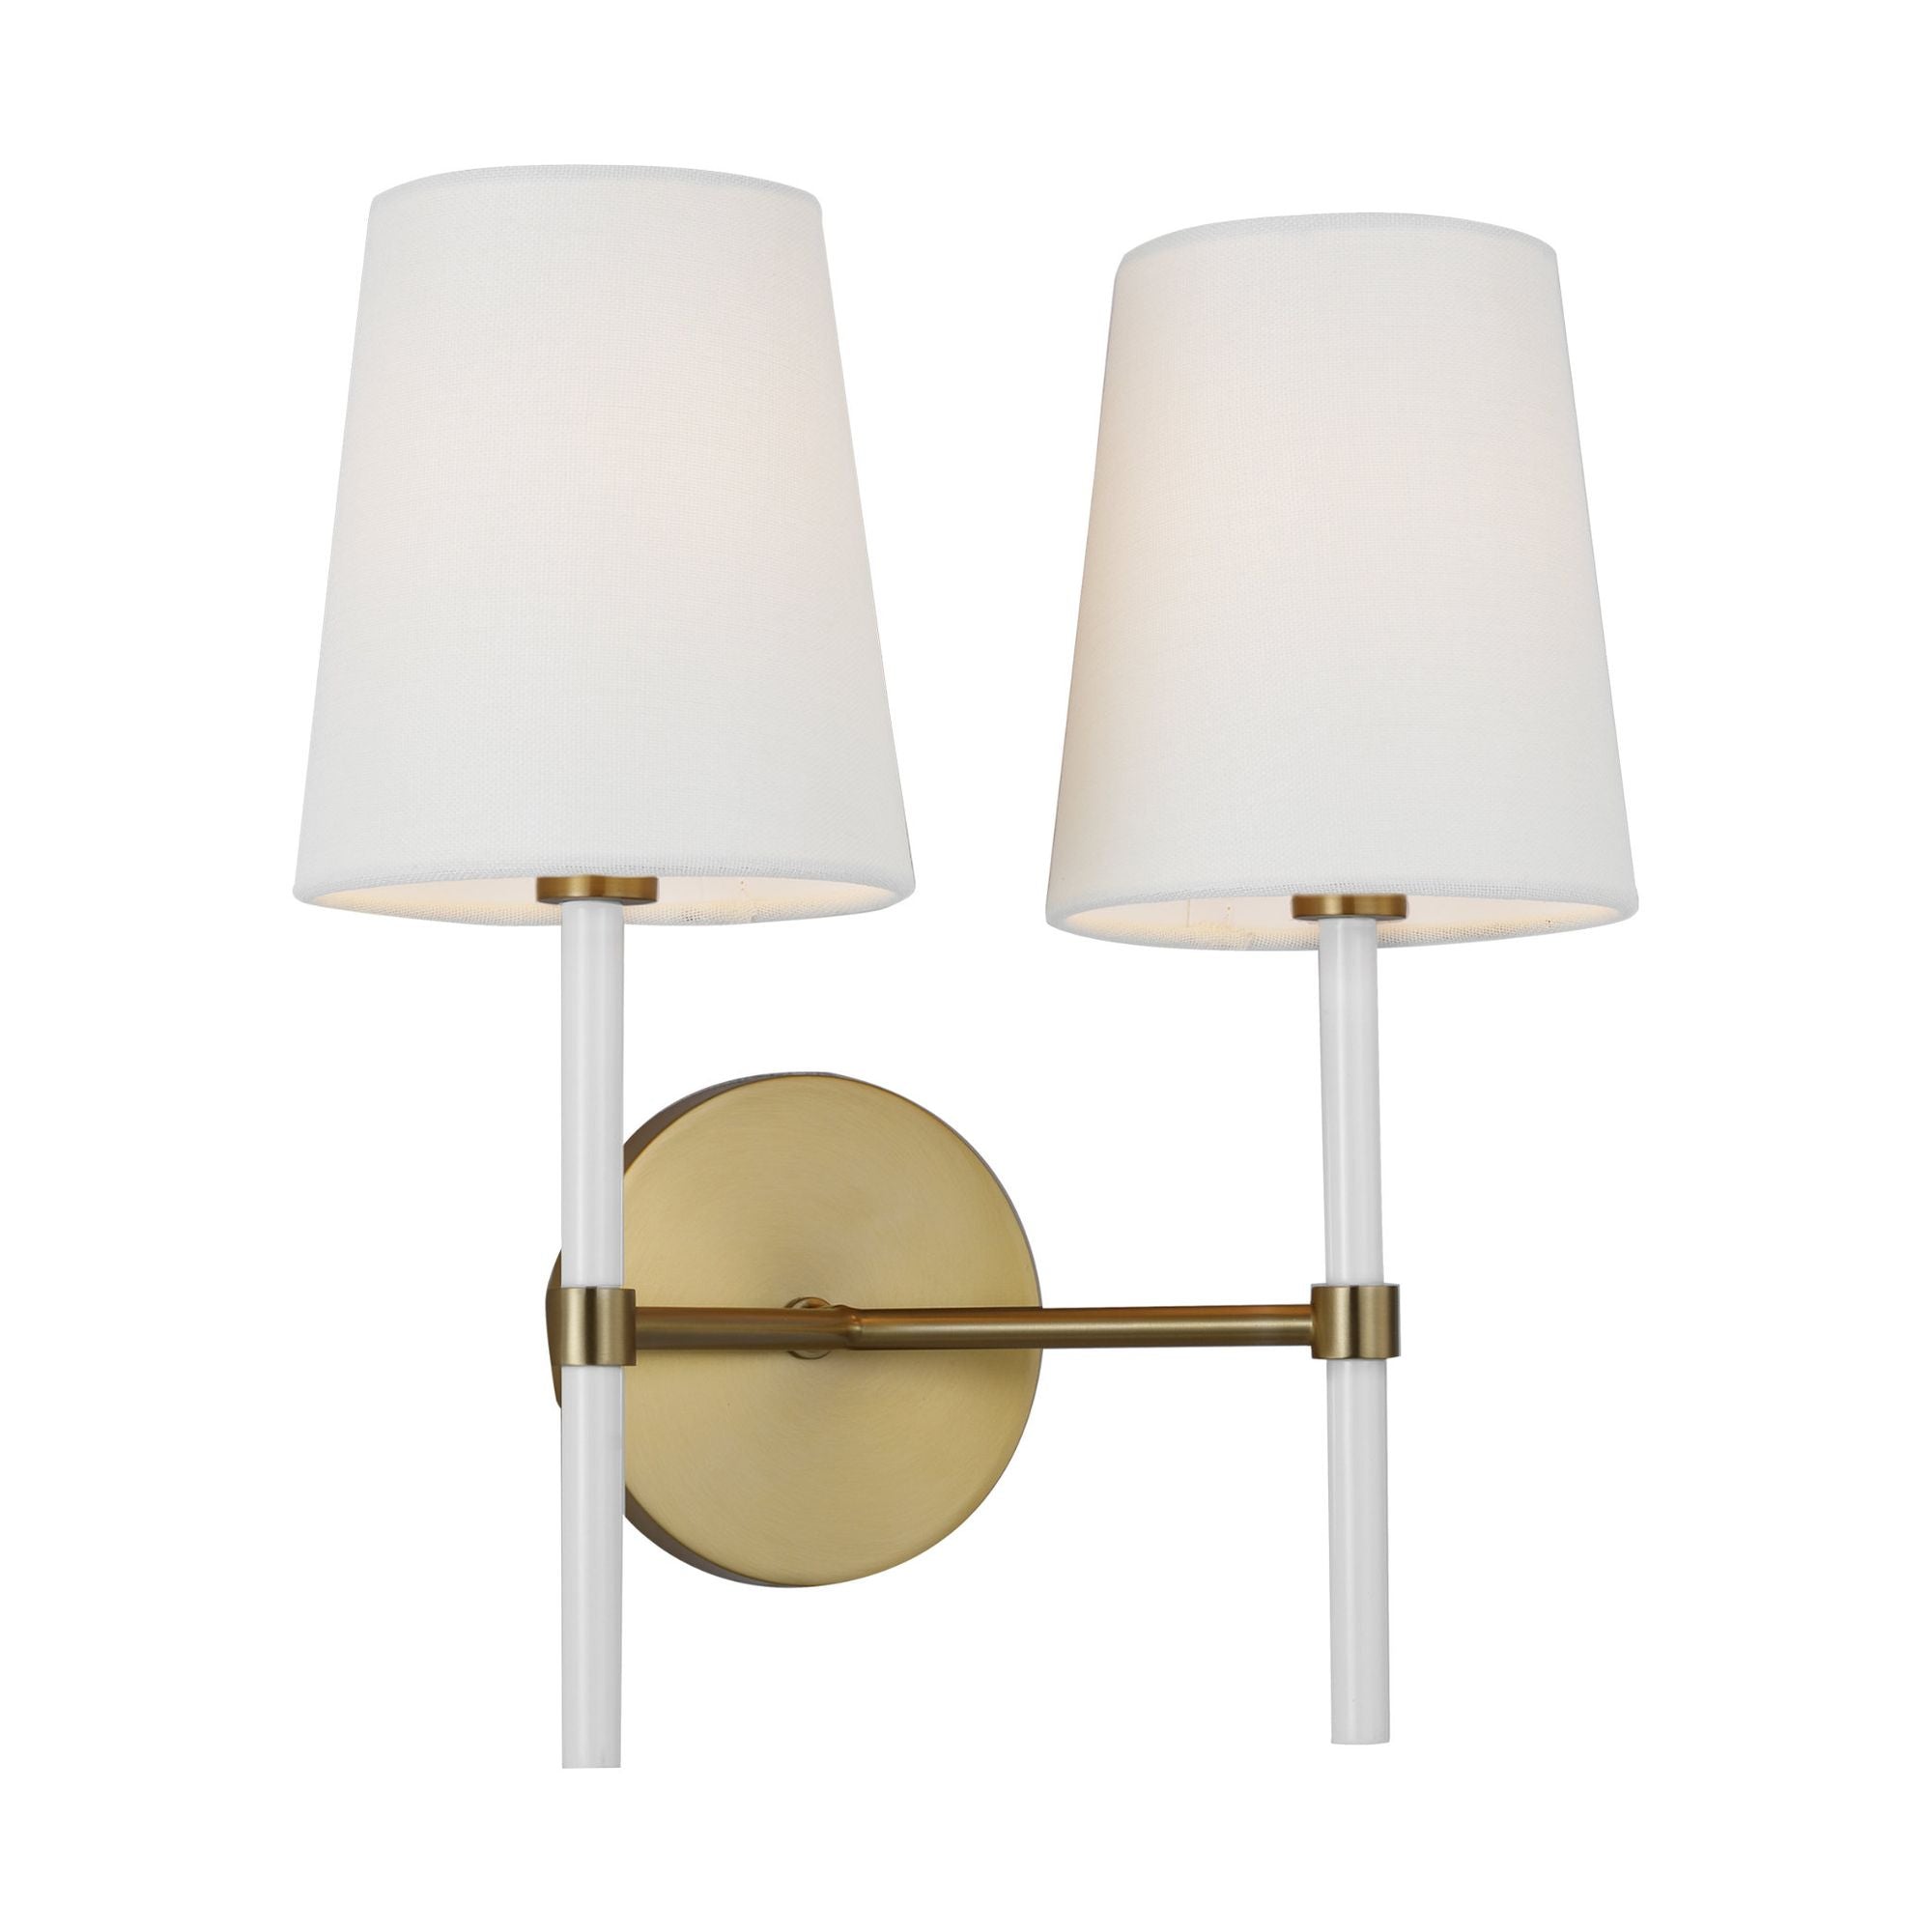 kate spade new york Monroe Double Sconce in Burnished Brass